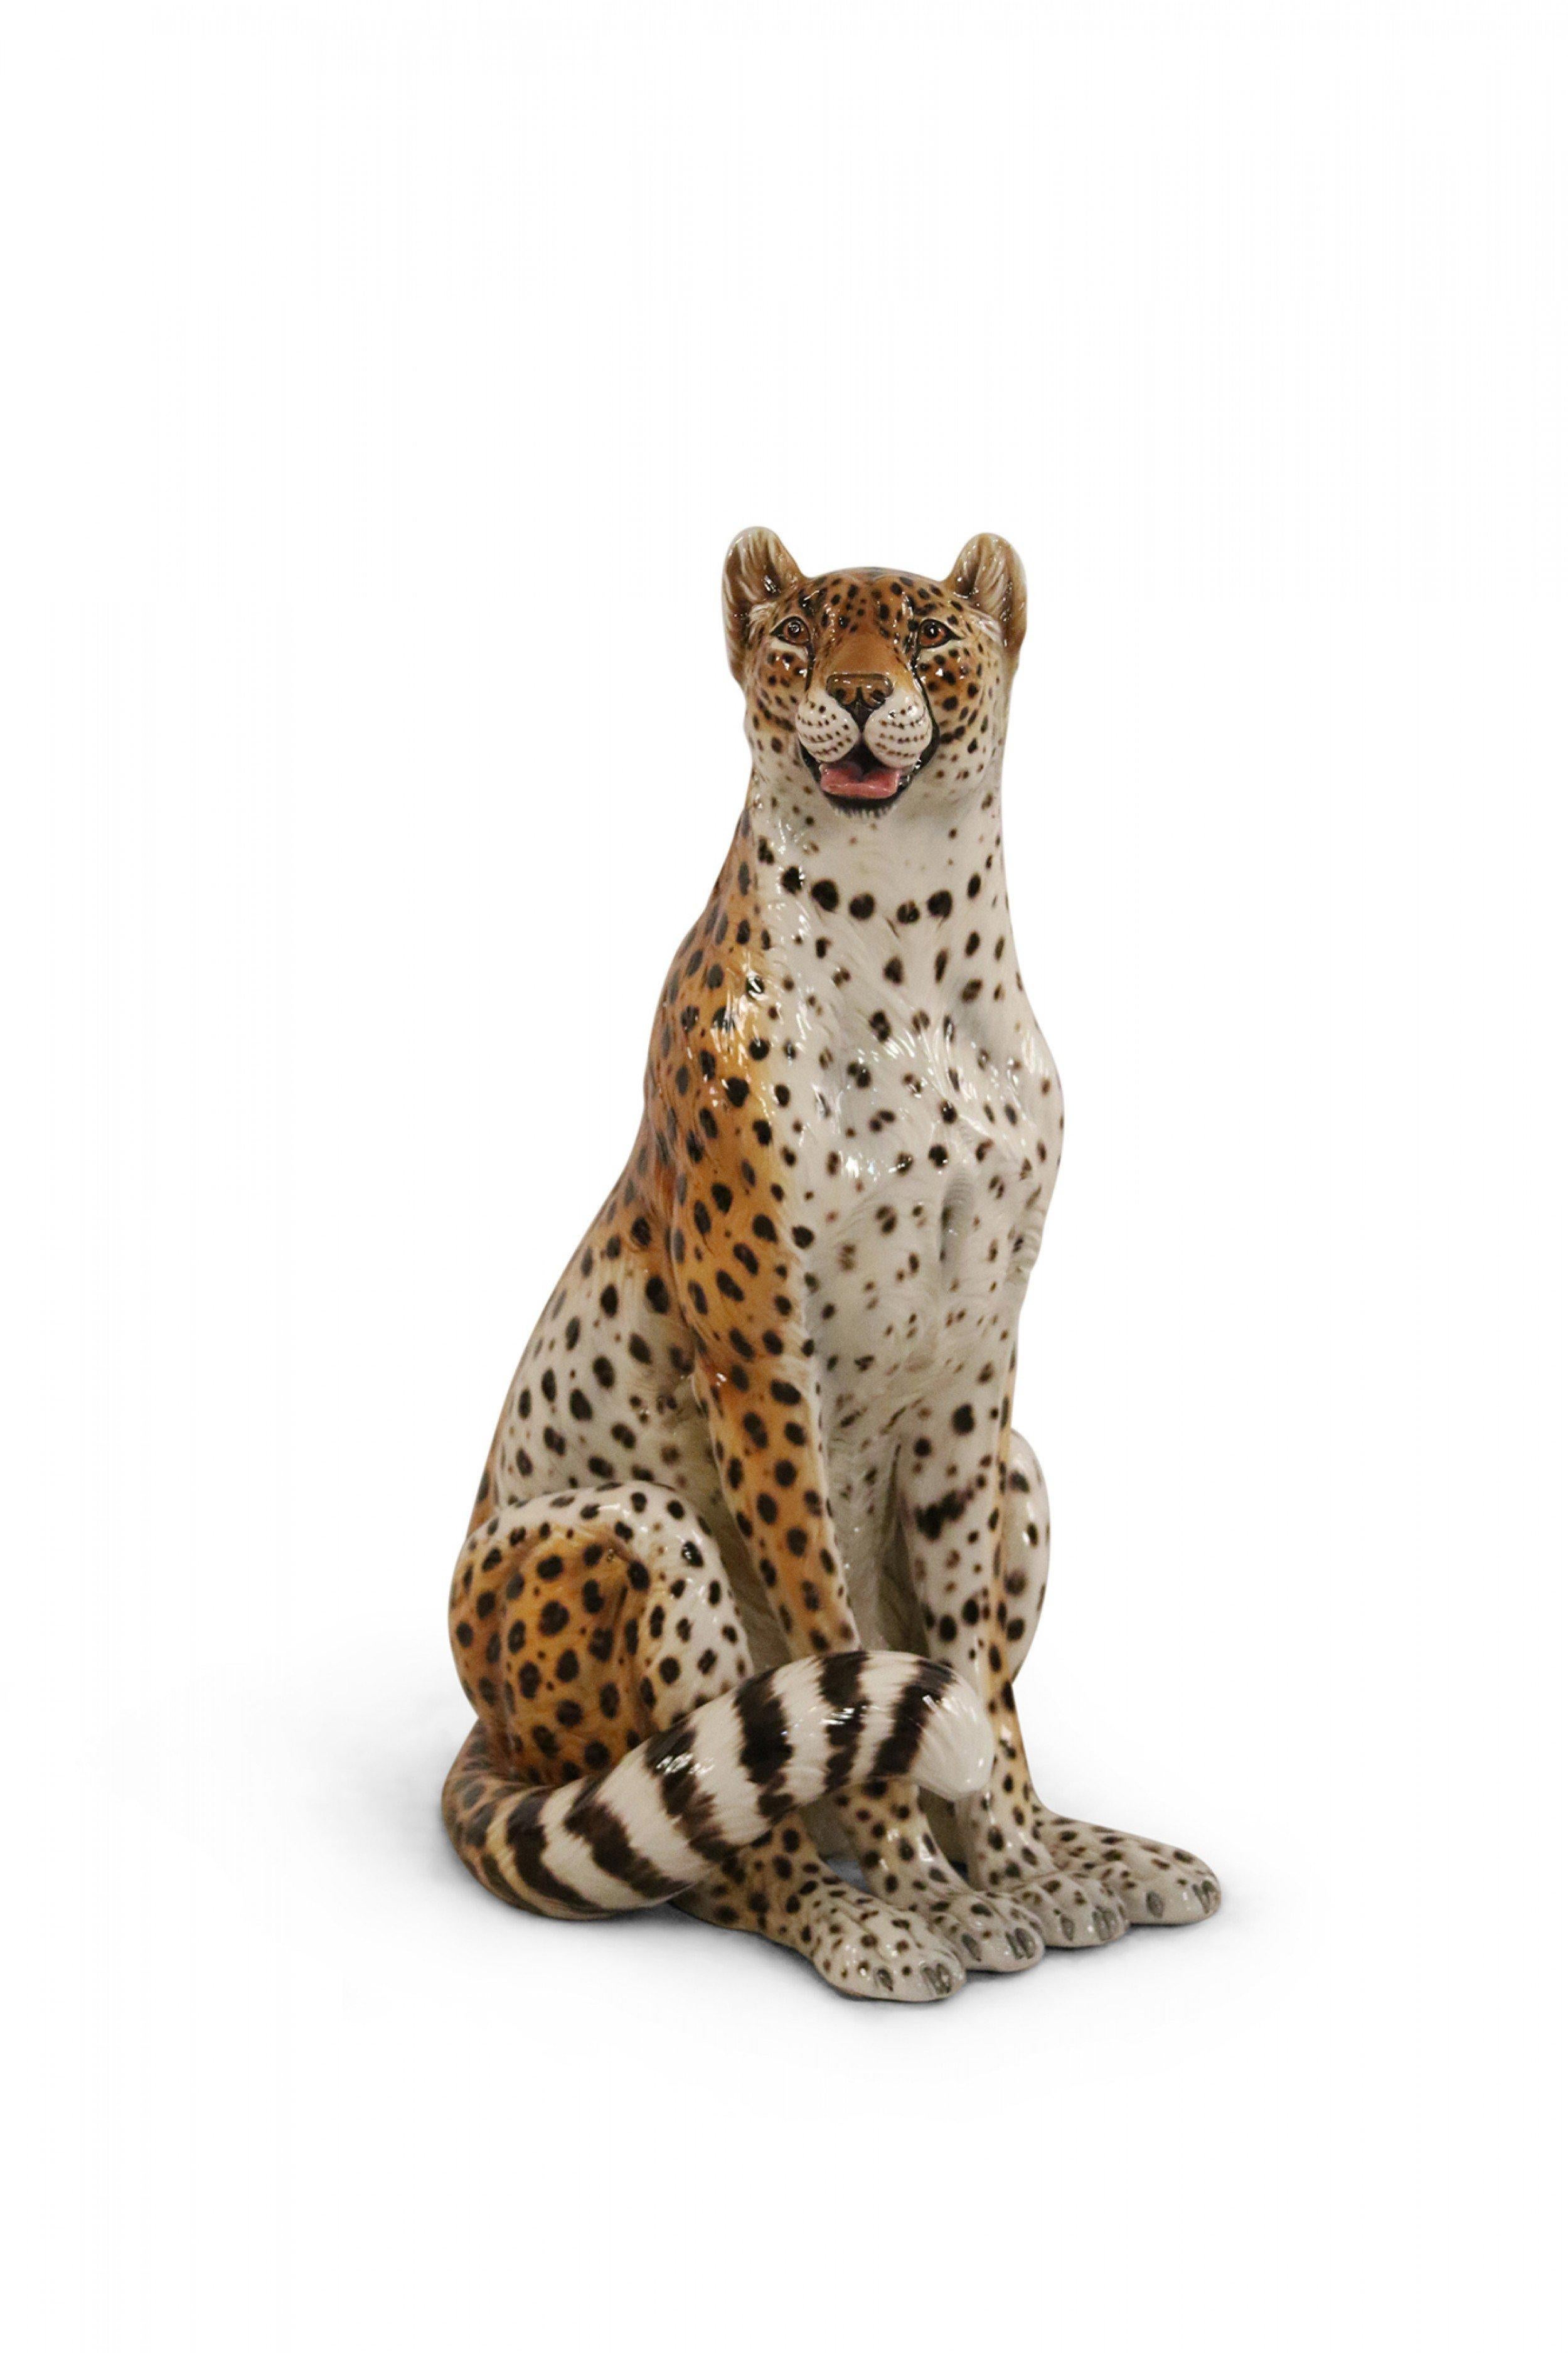 Italian glazed Majolica statue of a seated leopard with its mouth open.
 